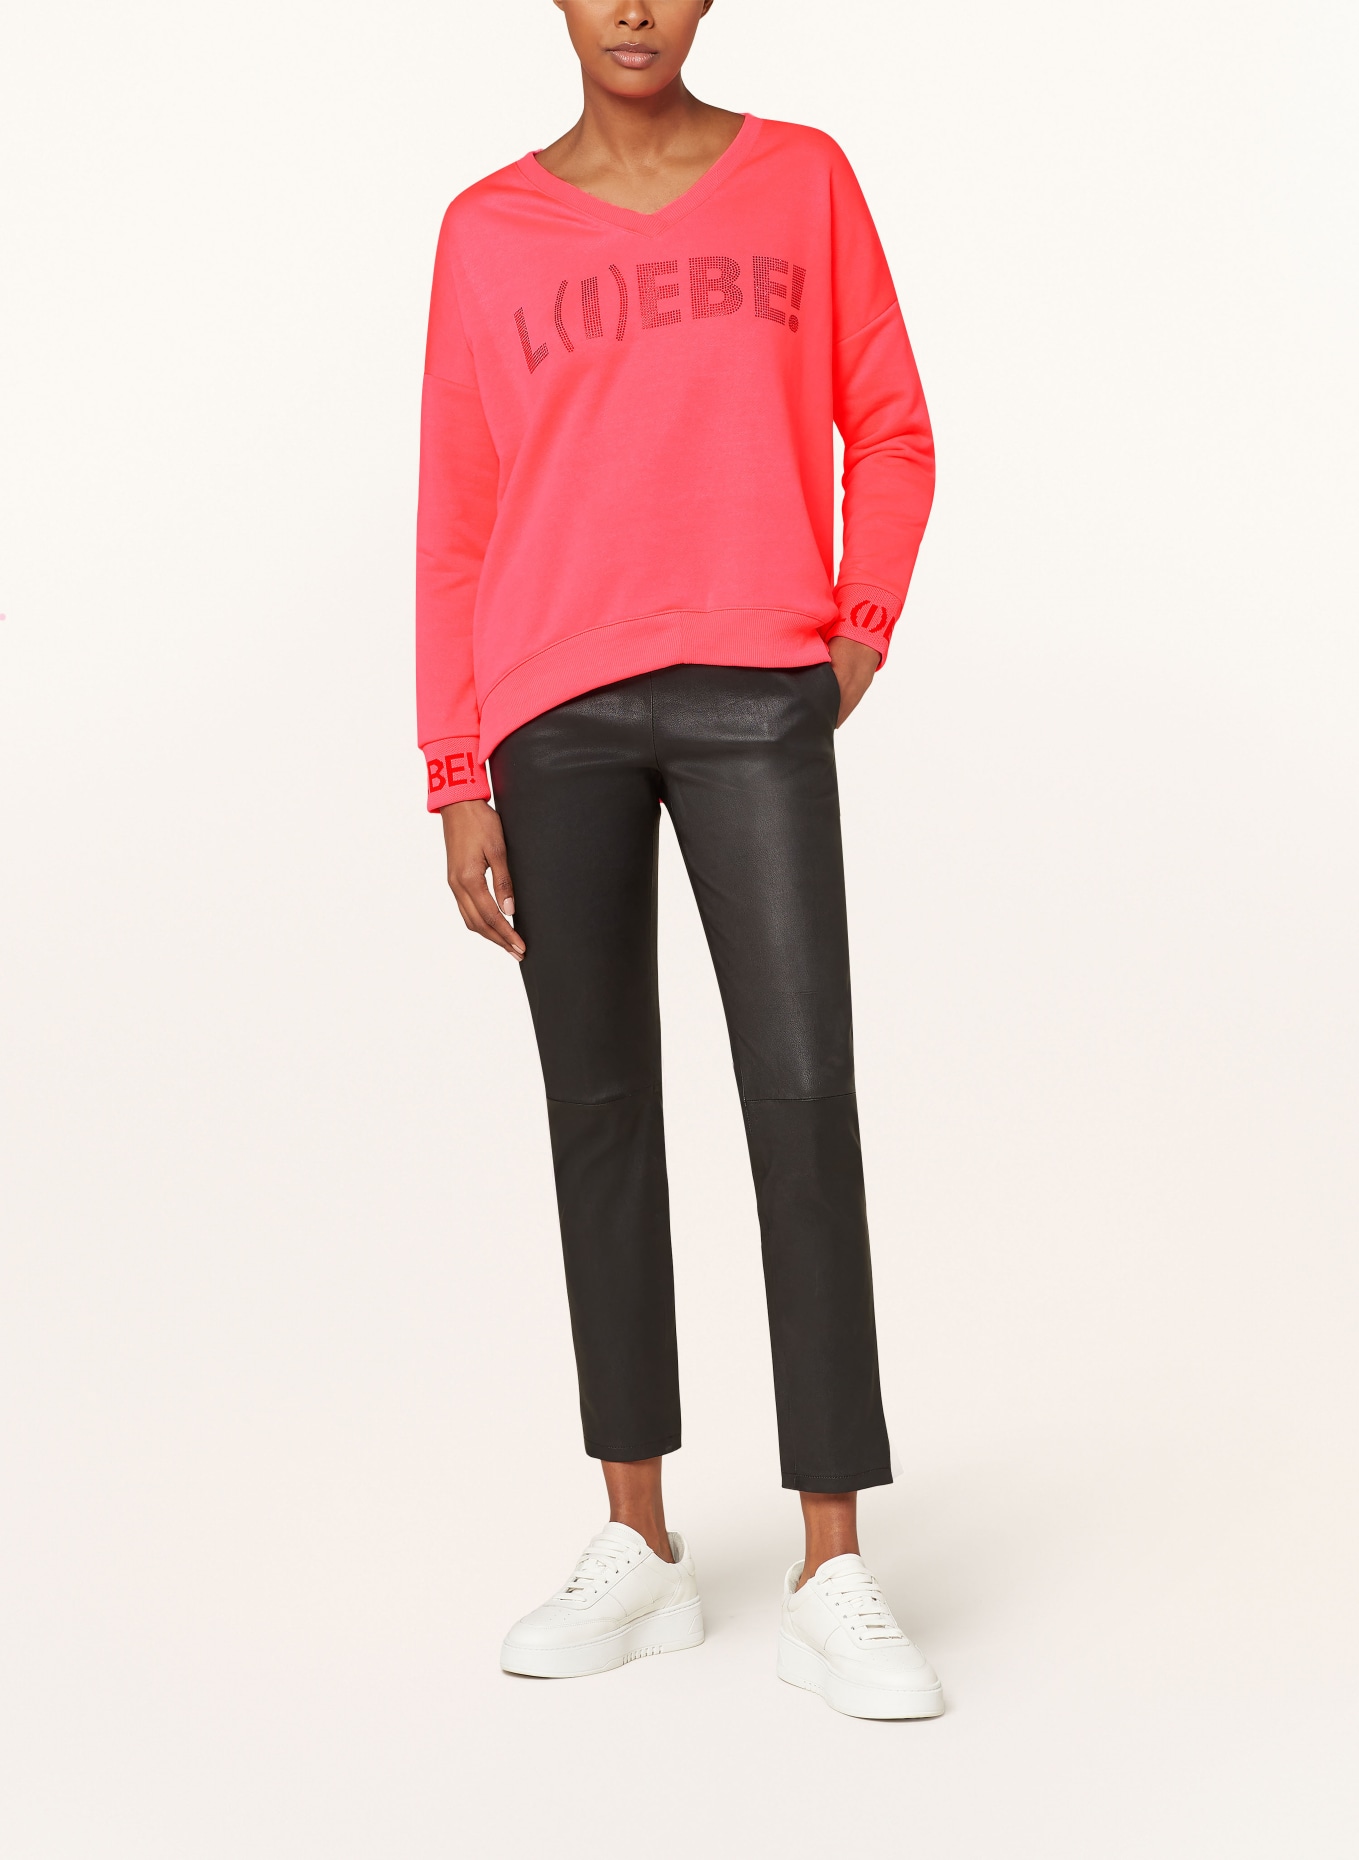 miss goodlife Sweatshirt with decorative gems, Color: NEON PINK (Image 2)